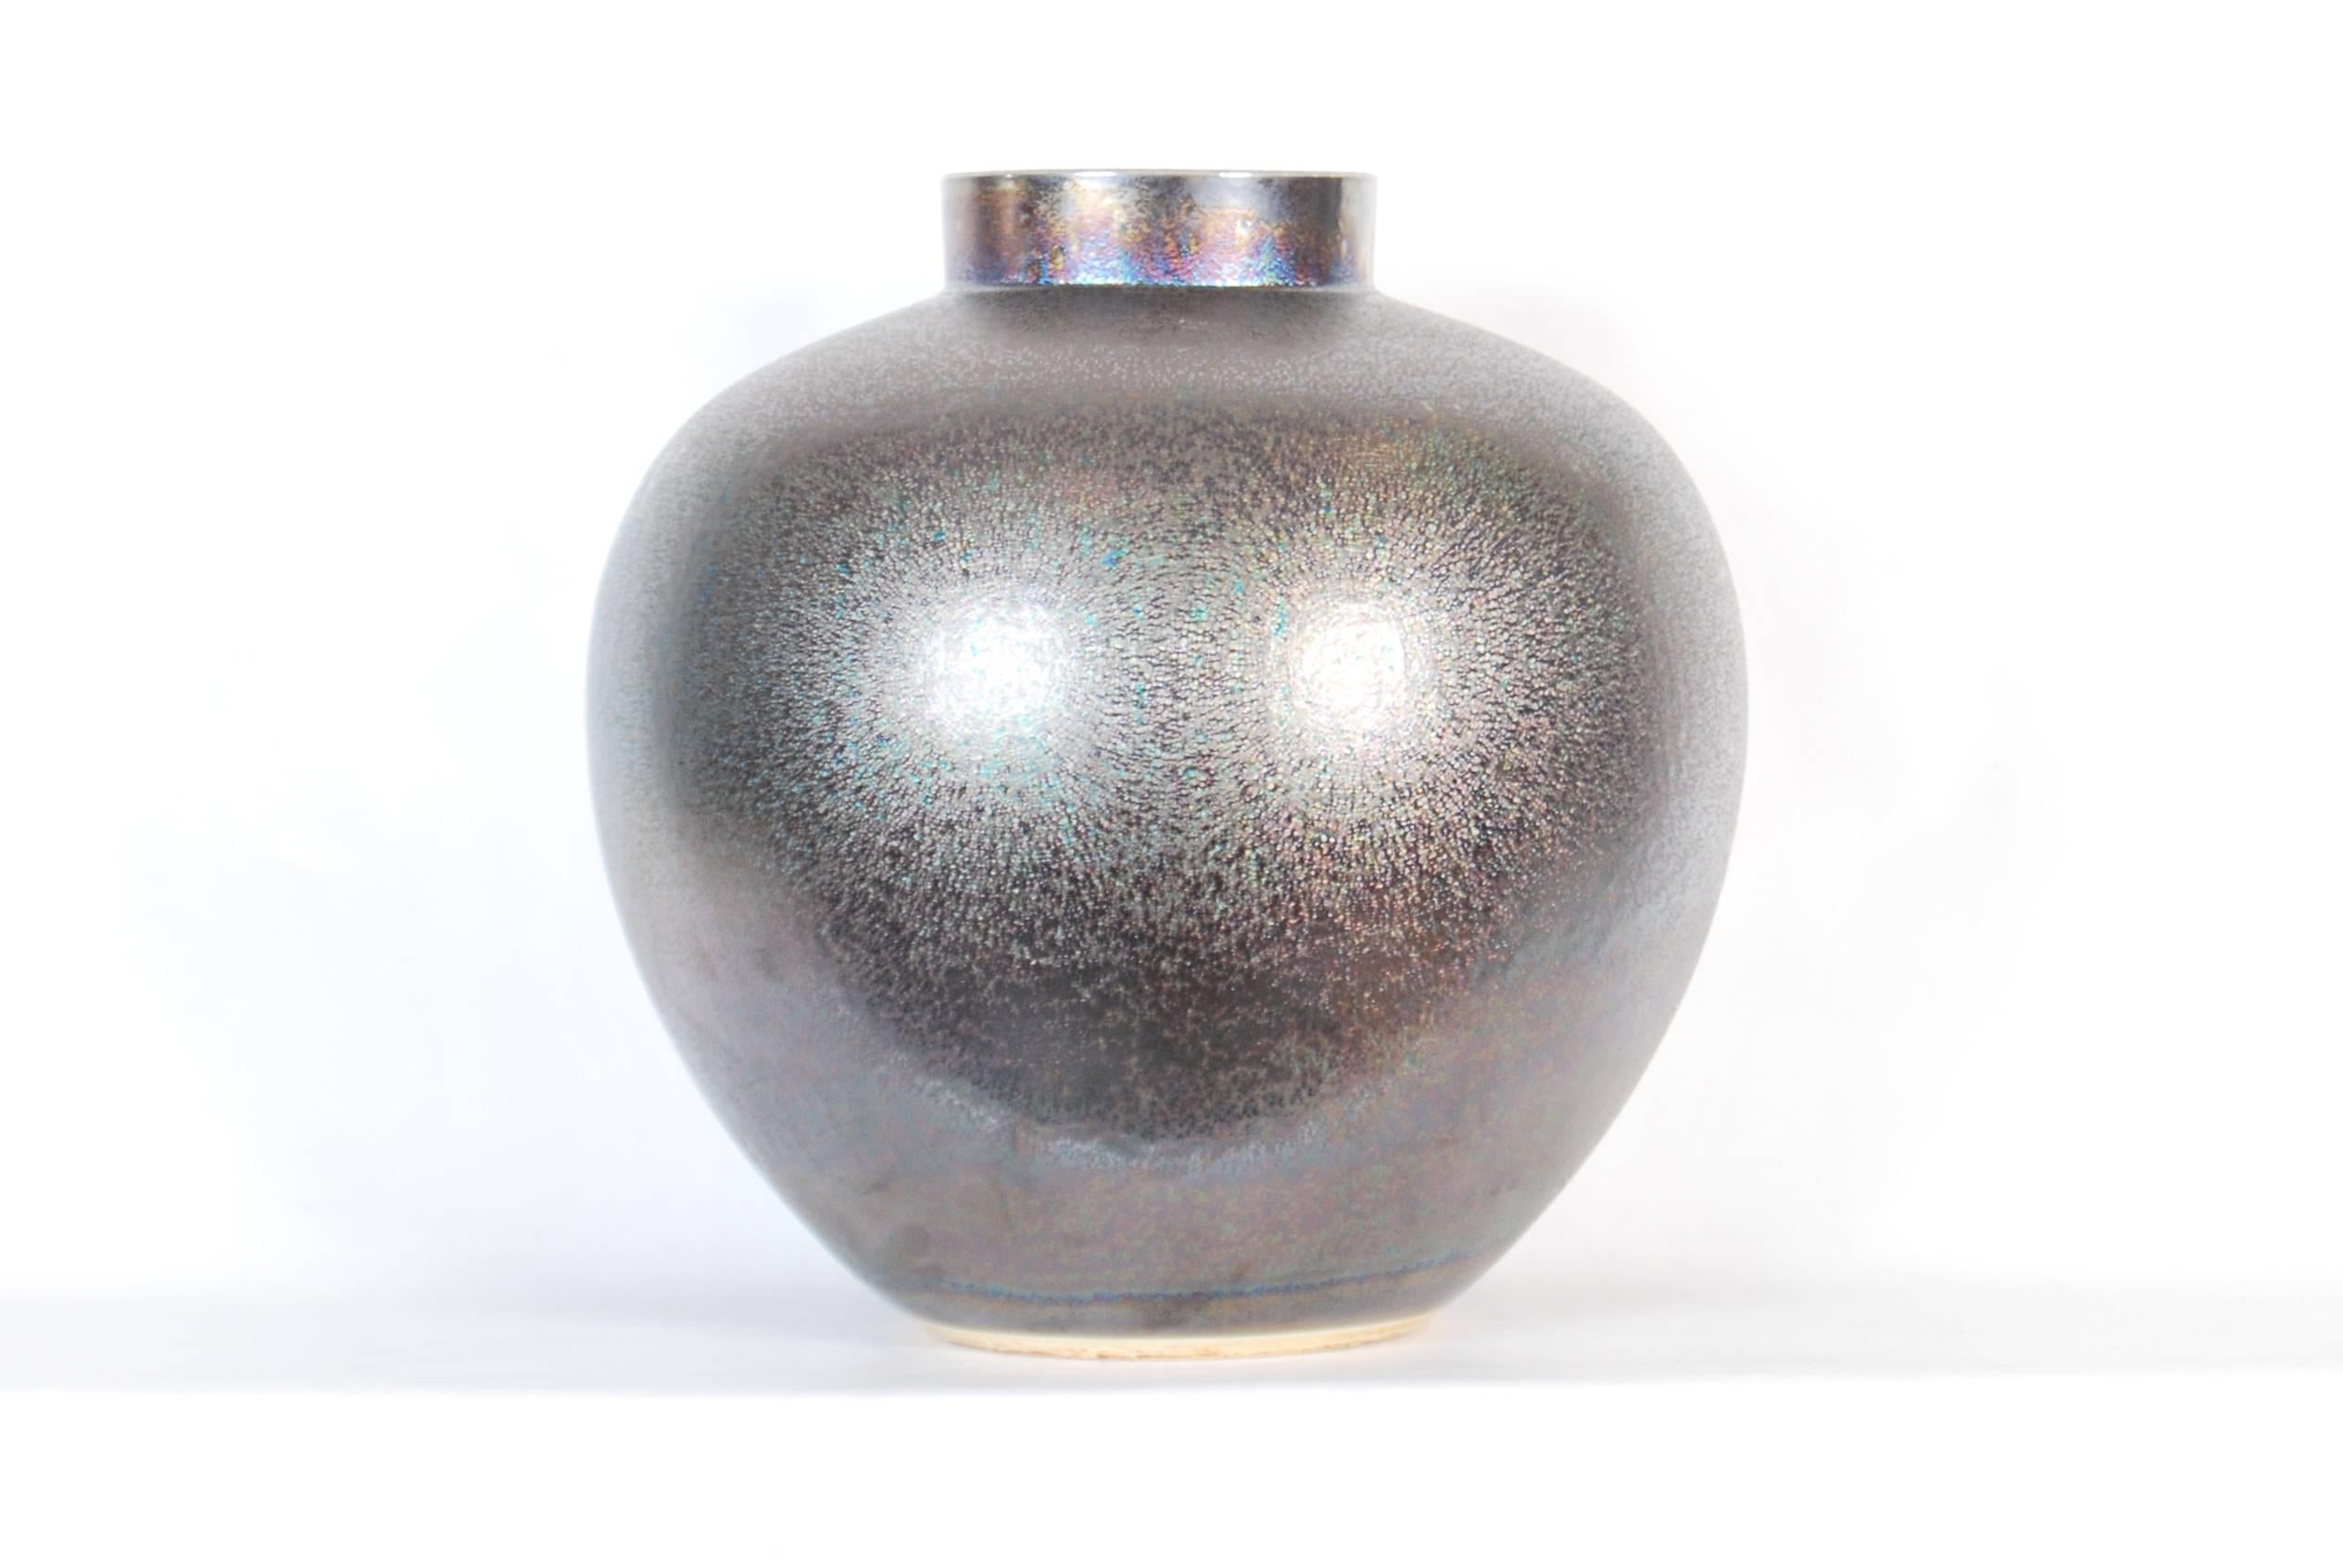 Large contemporary Japanese ceramic vase by the noted potter Yasuaki Maeda (b.1937) a regular exhibitor at the Nitten, Japan's premier art and Craft fair. 

Finished overall with a dark metallic pewter toned glaze with opalescent highlights and